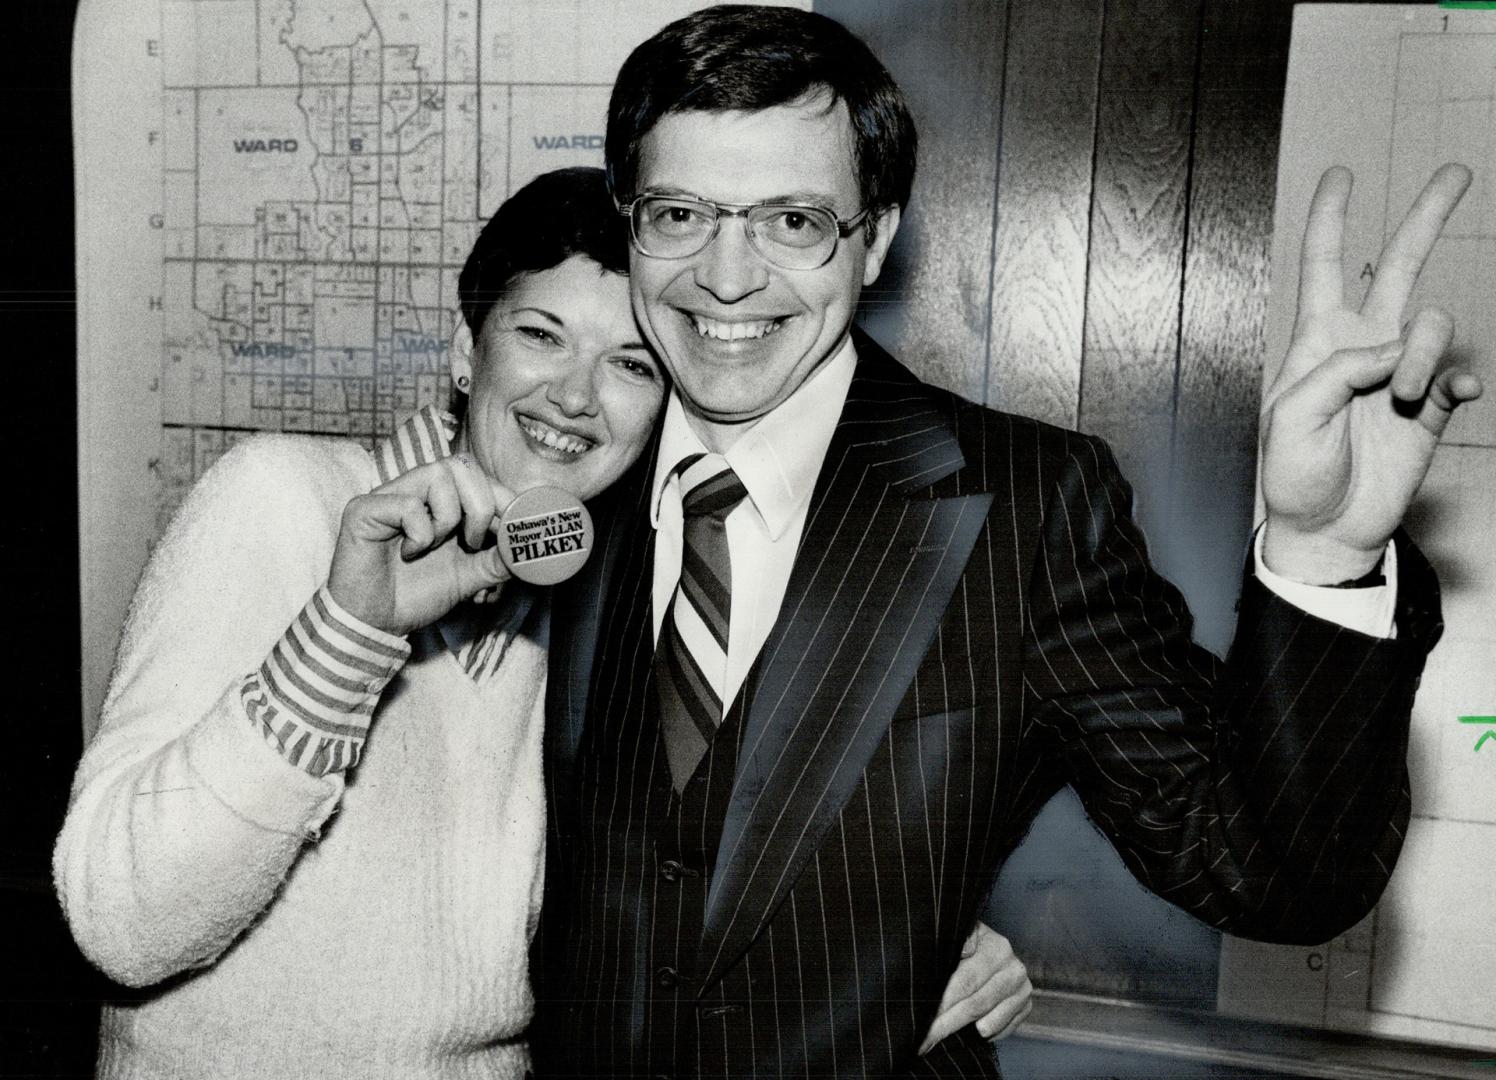 V for Victory. Allan Pilkey gives the V for Victory sign as he hugs his wife at his Oshawa campaign headquarters. Pilkey upset Mayor Jim Potticary for(...)